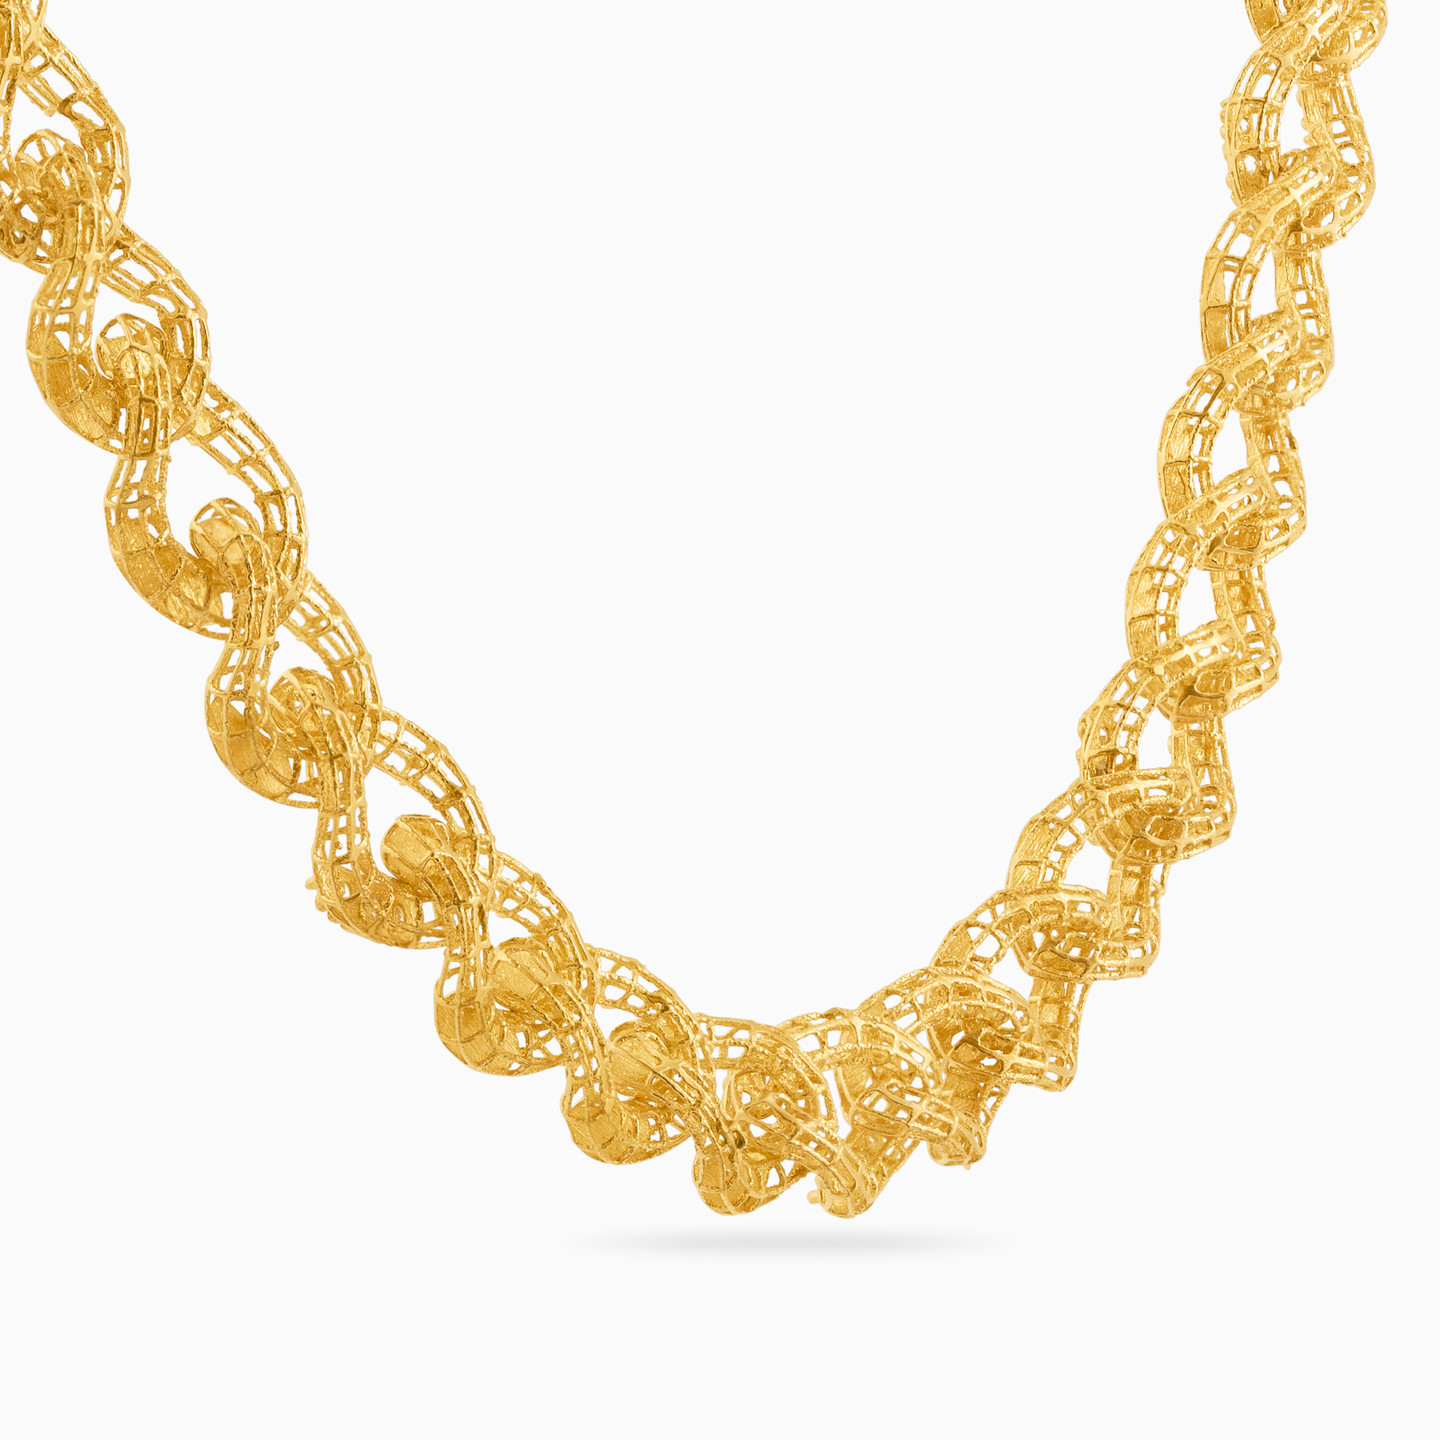 21K Gold Chain Necklace - 2